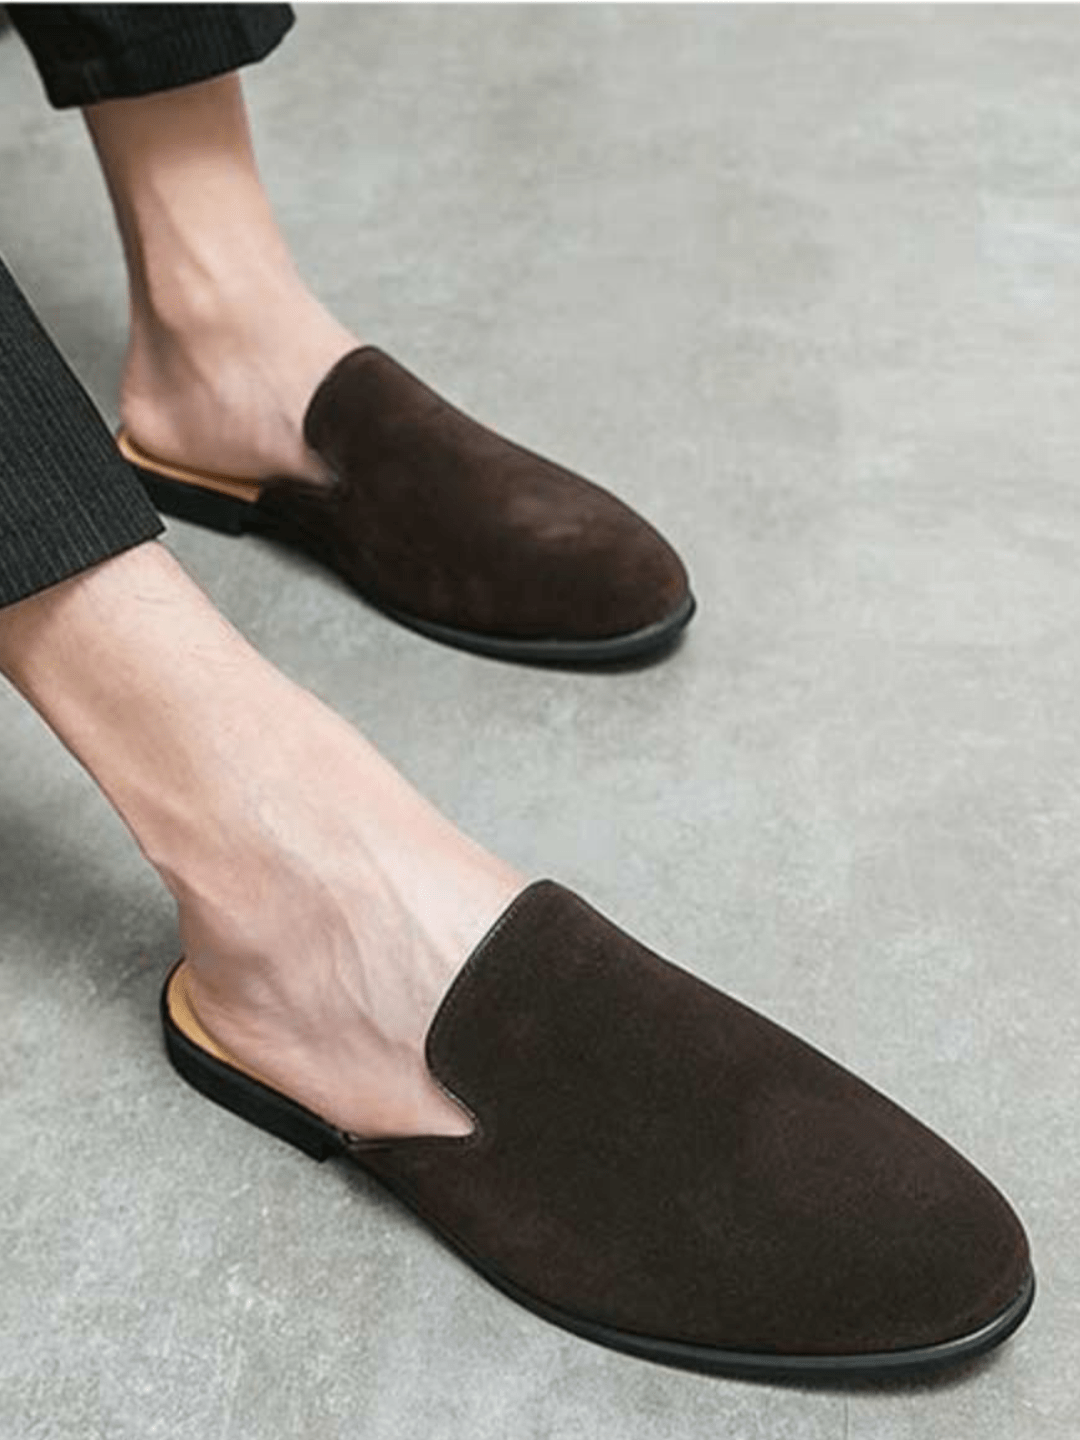 Suede Casual Half-slippers na1138